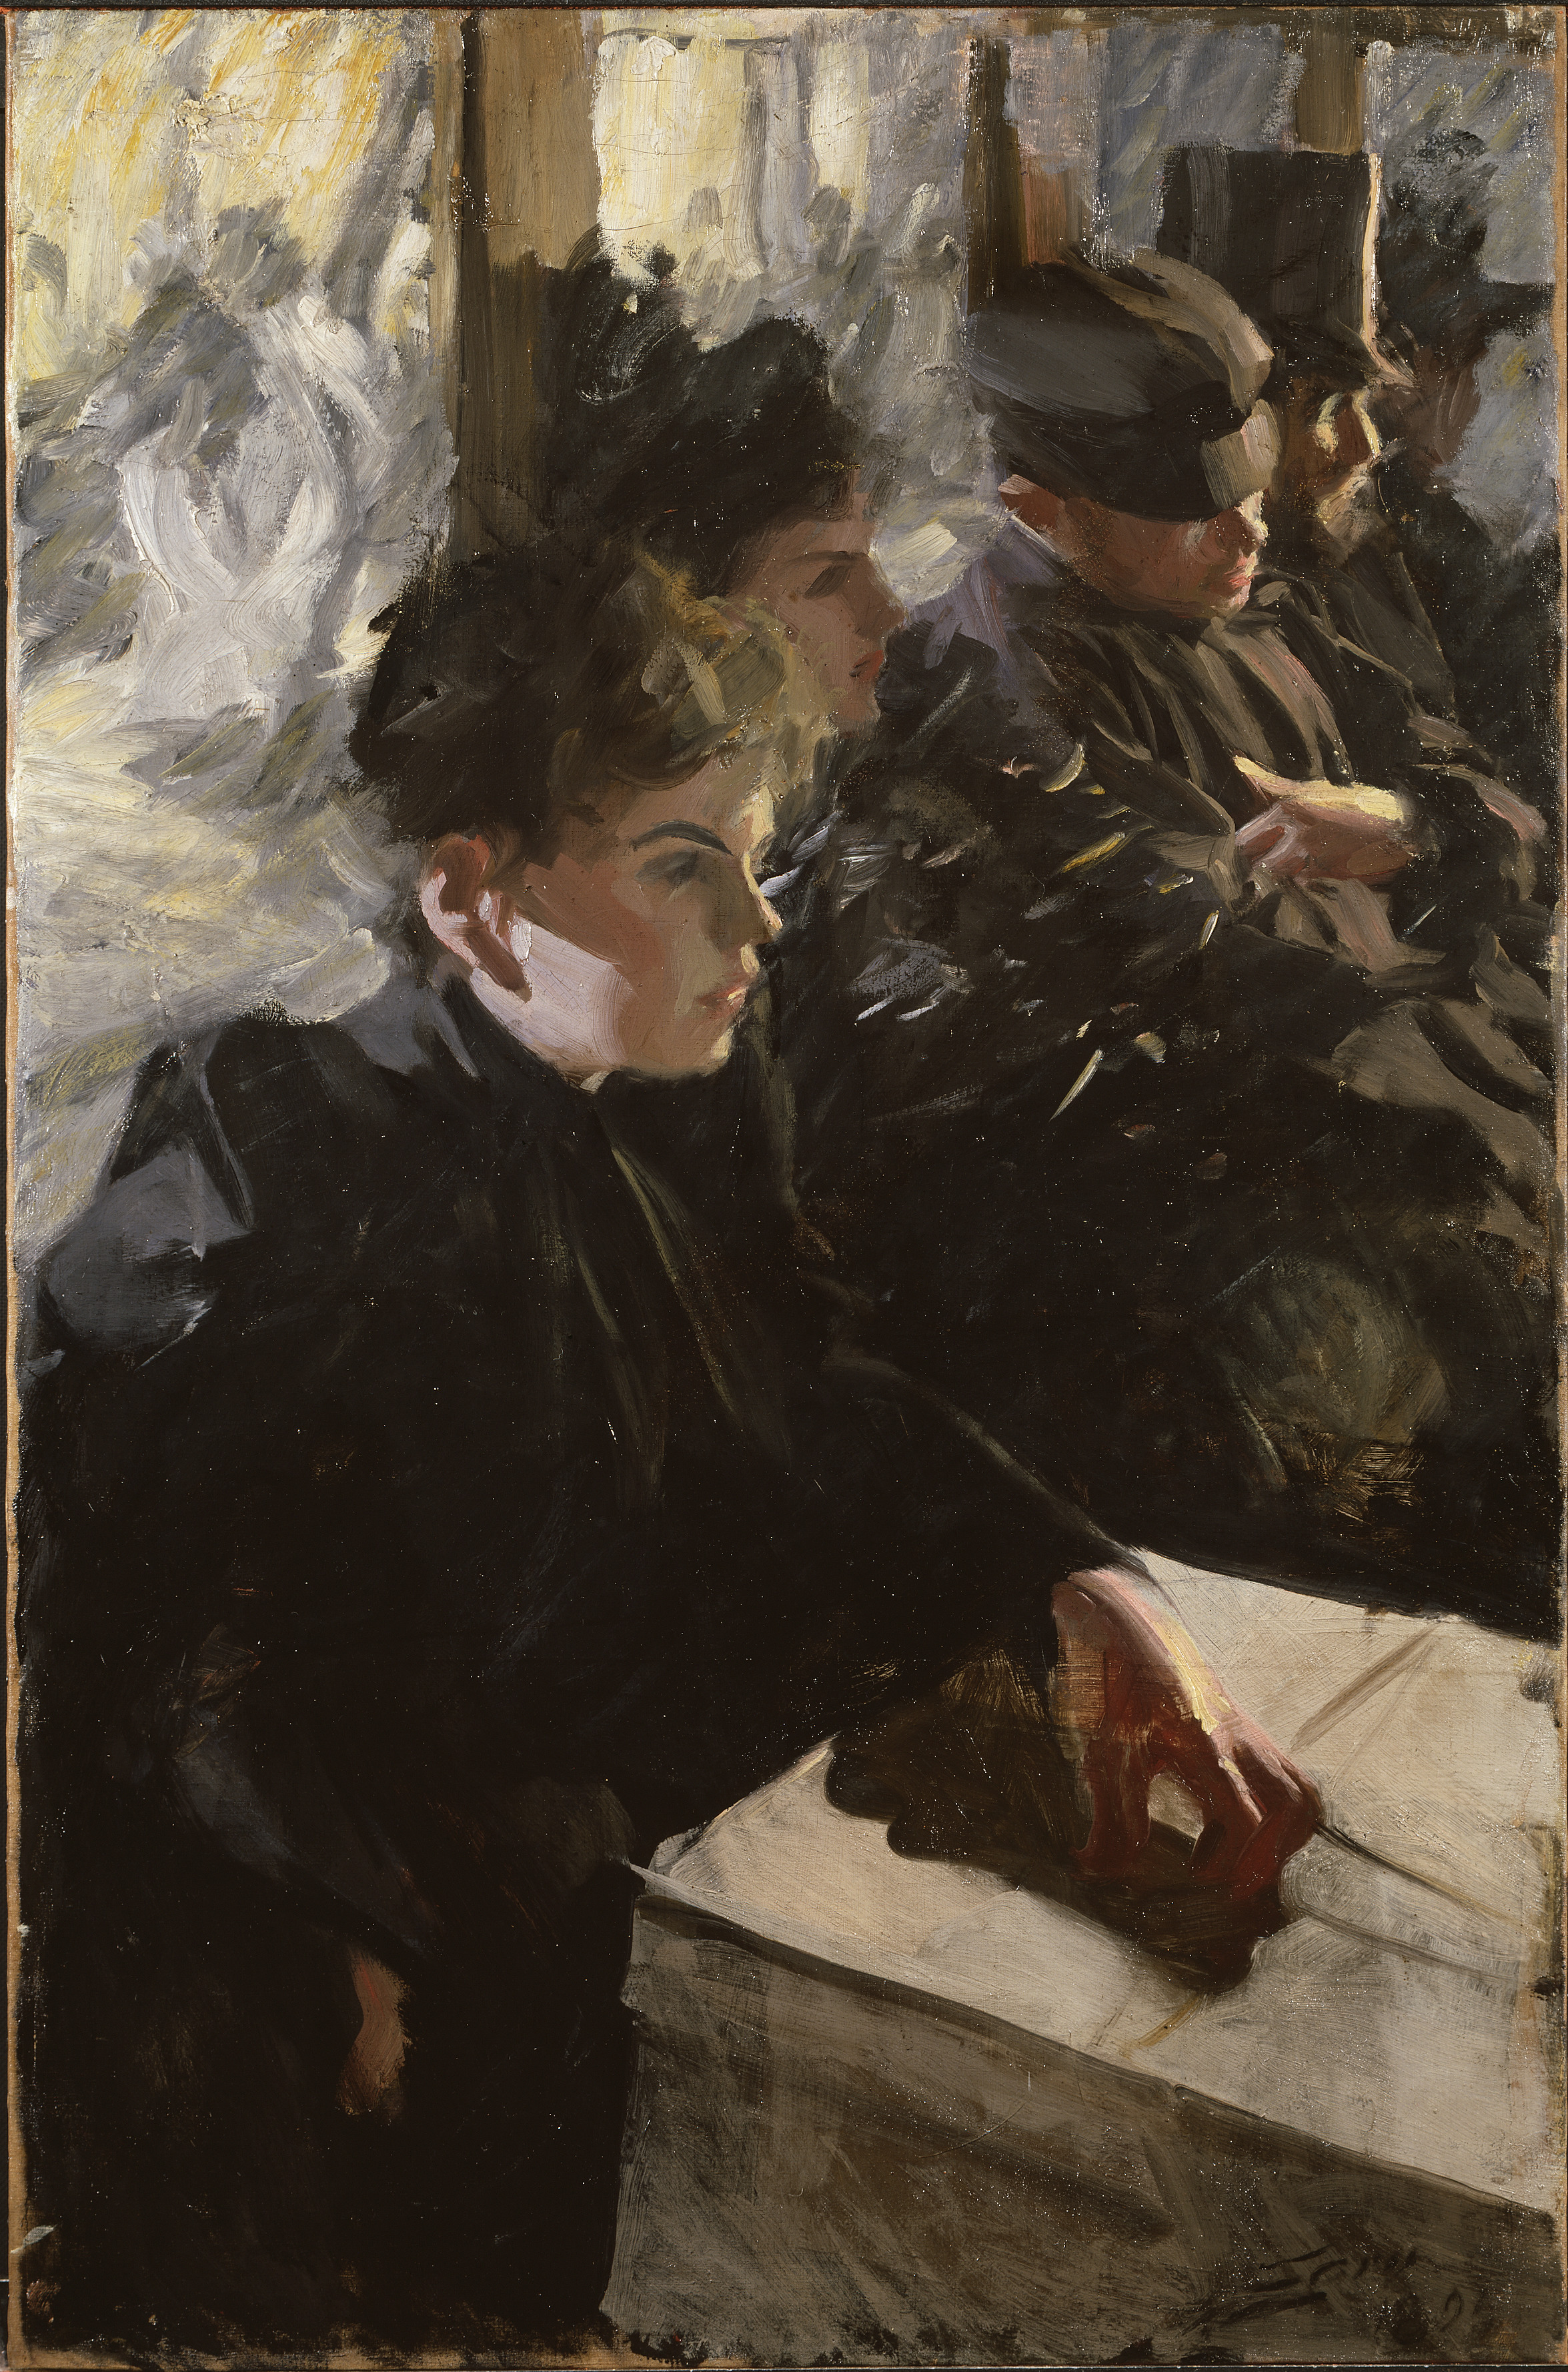 Omnibus I by Anders Zorn - 1895 or 1892 - 114 x 79 x 7 cm Nationalmuseum